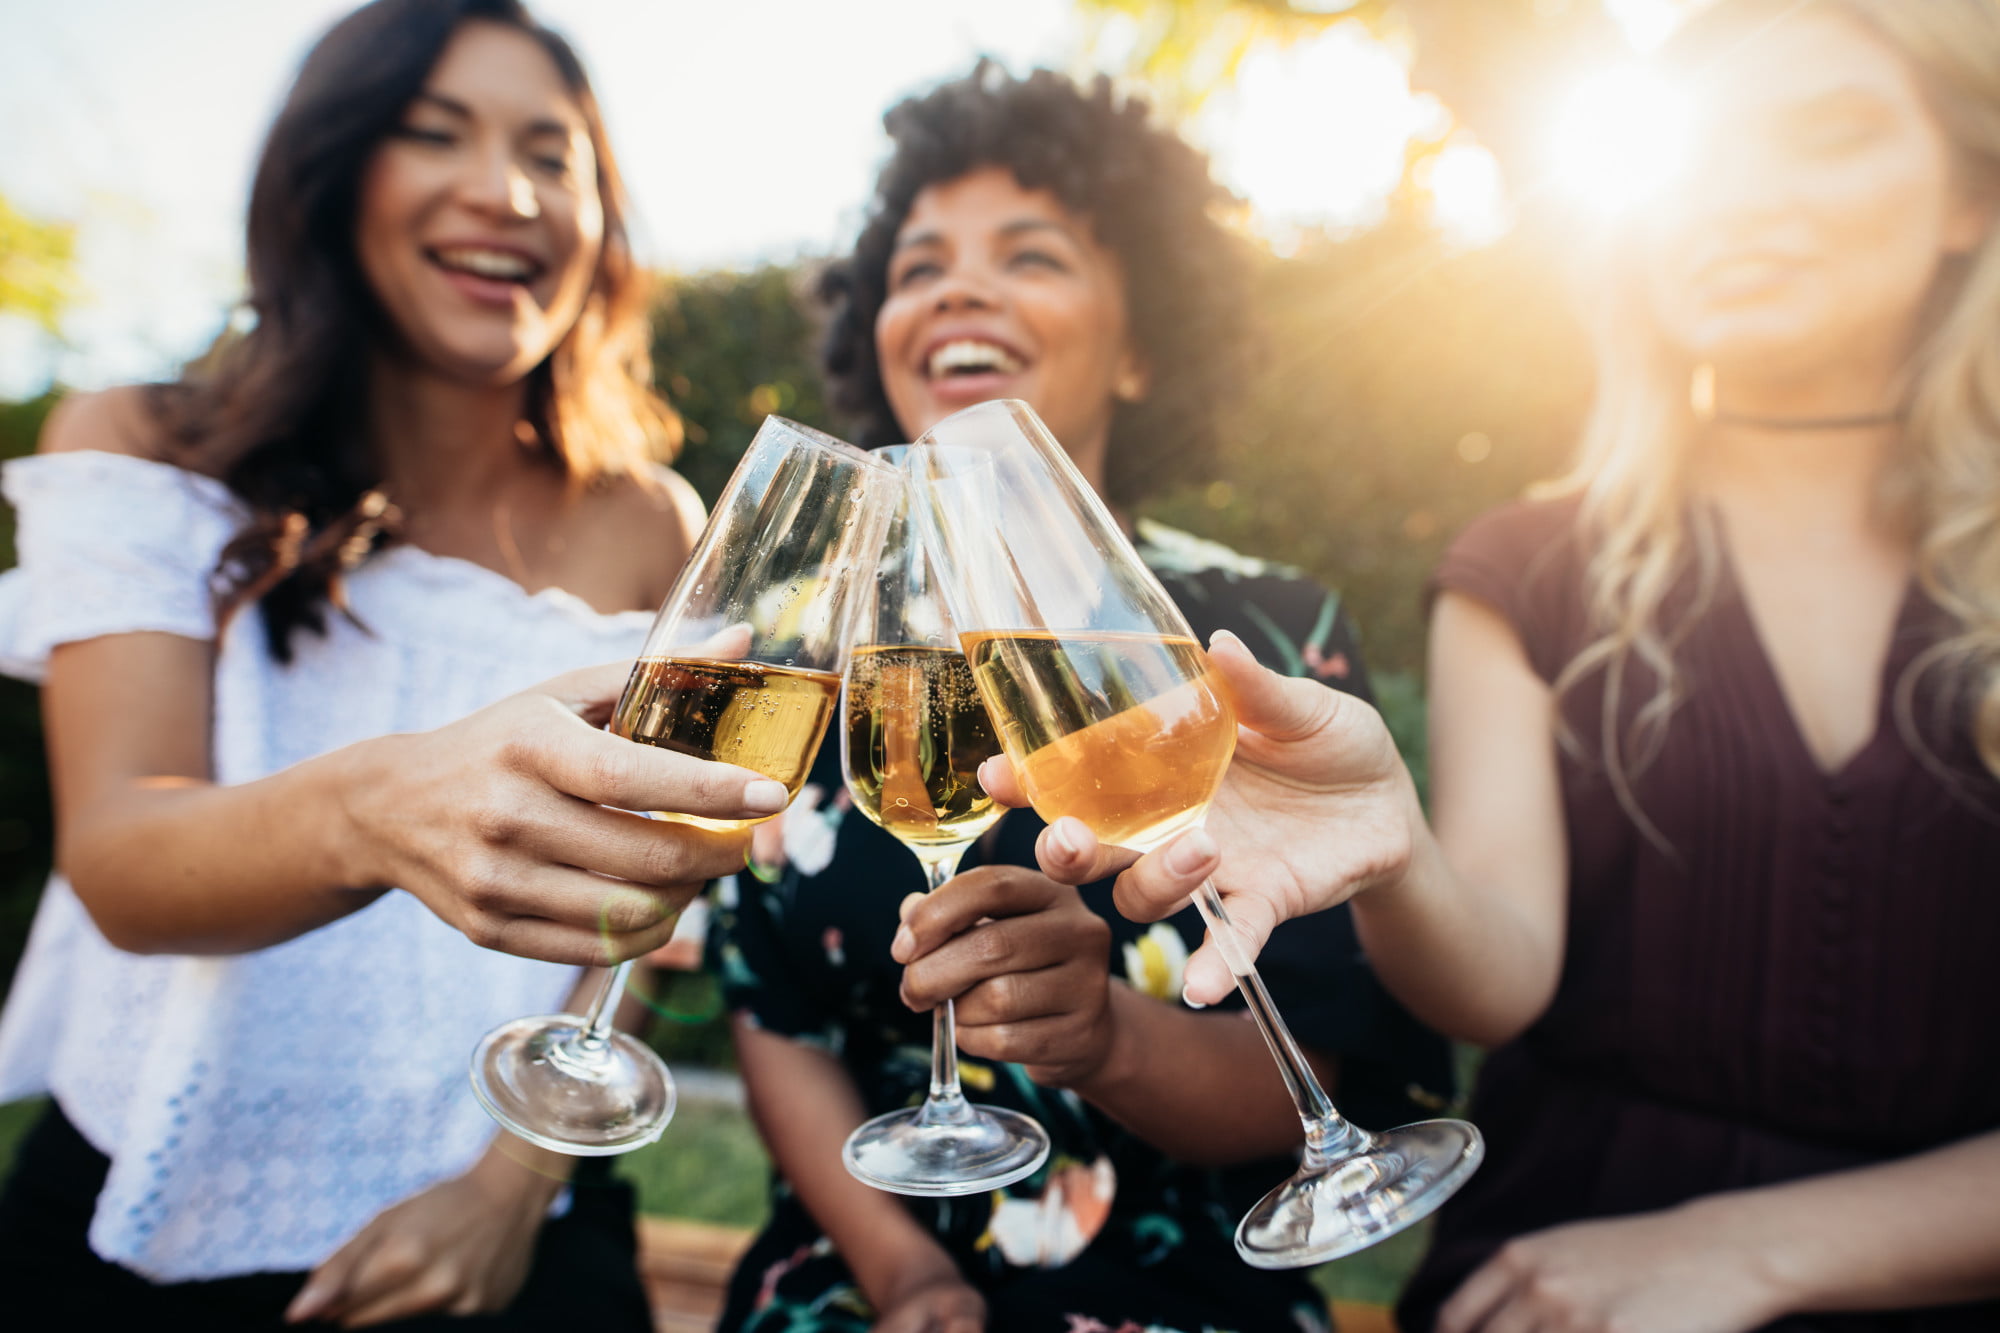 Every year on May 25, wine lovers in the U.S. celebrate National Wine Day. If you're looking for some ideas on how to celebrate next time, click here!